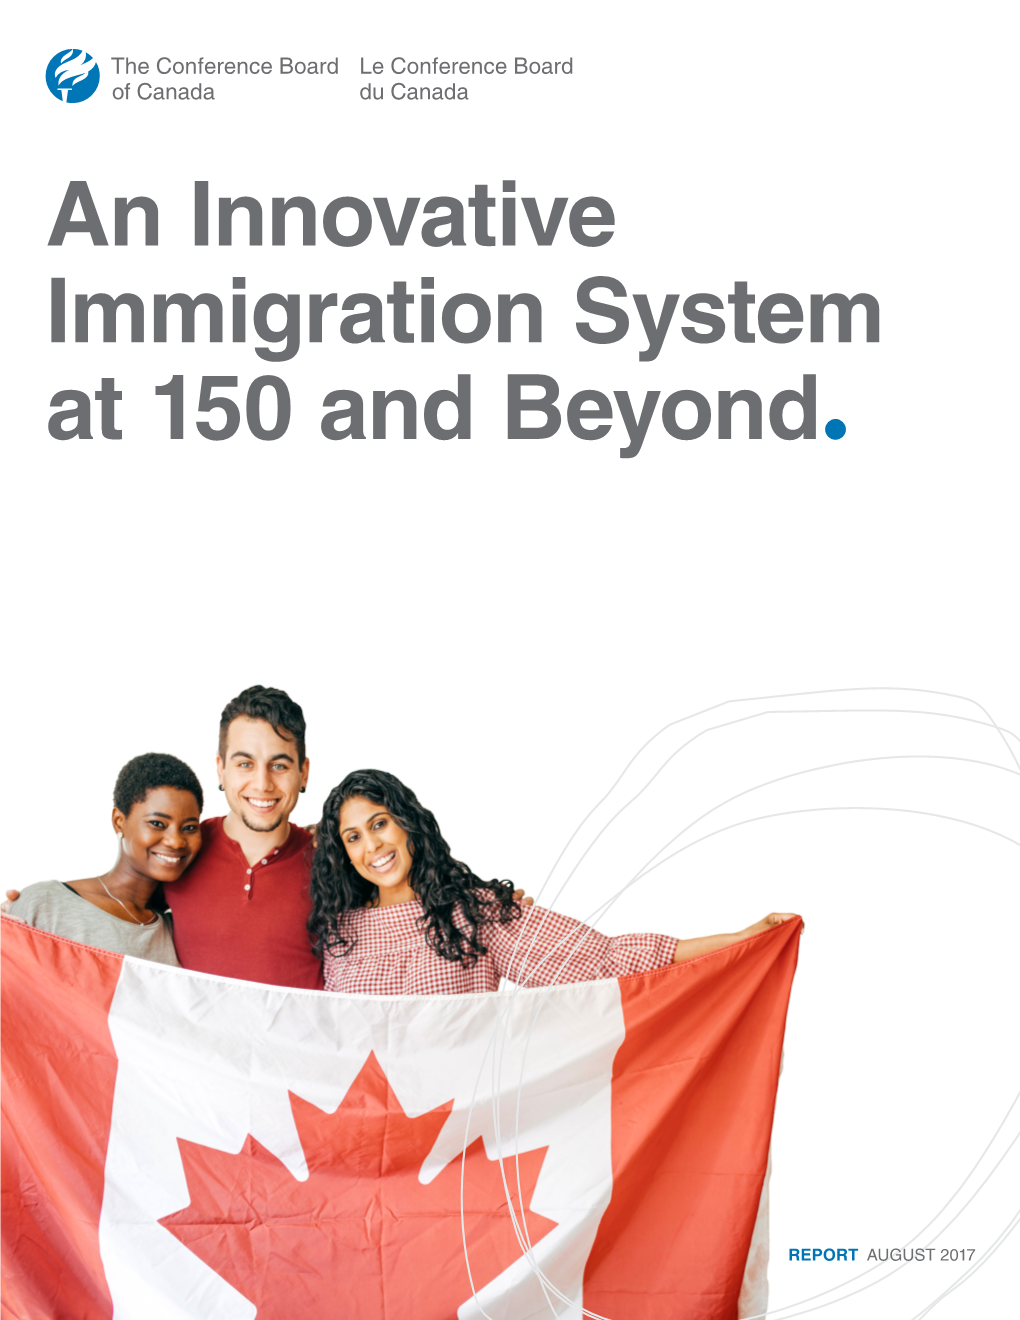 An Innovative Immigration System at 150 and Beyond